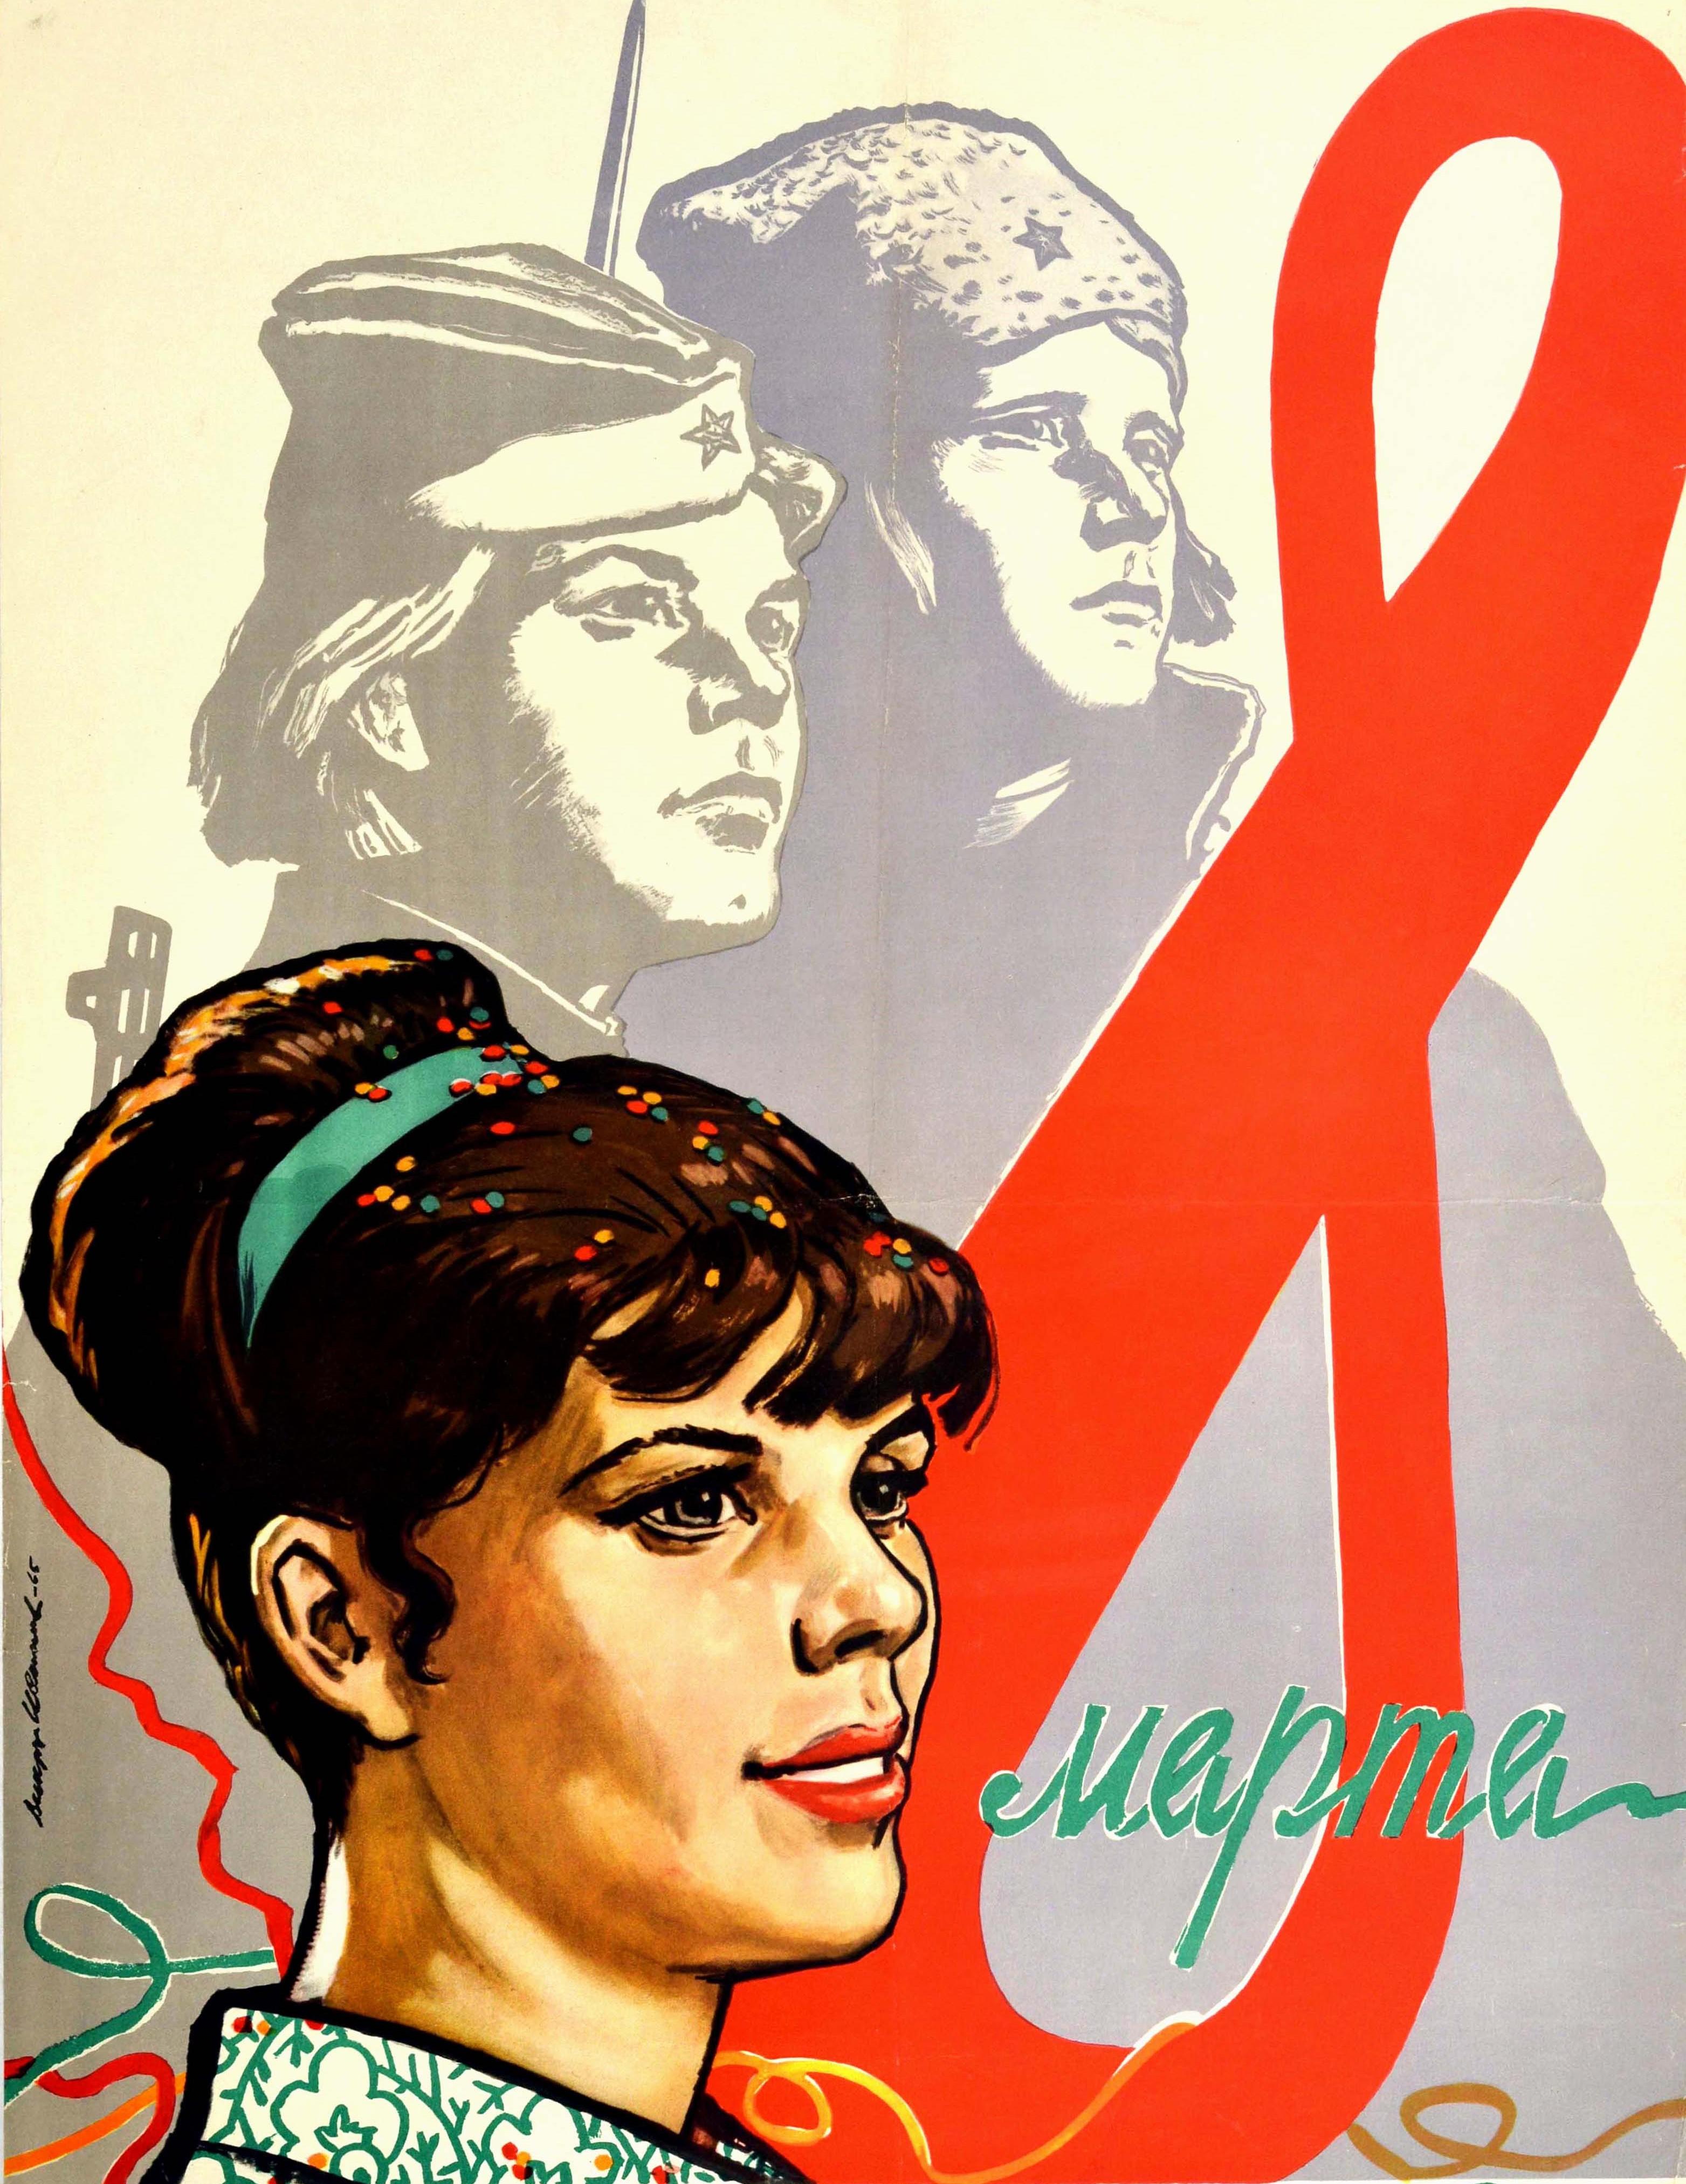 Original vintage Soviet poster celebrating International Women's Day on 8 March - Glory to Women! - featuring a lady with colourful confetti in her hair in front of a large red number eight and the word Marta / March stylised like a streamer ribbon